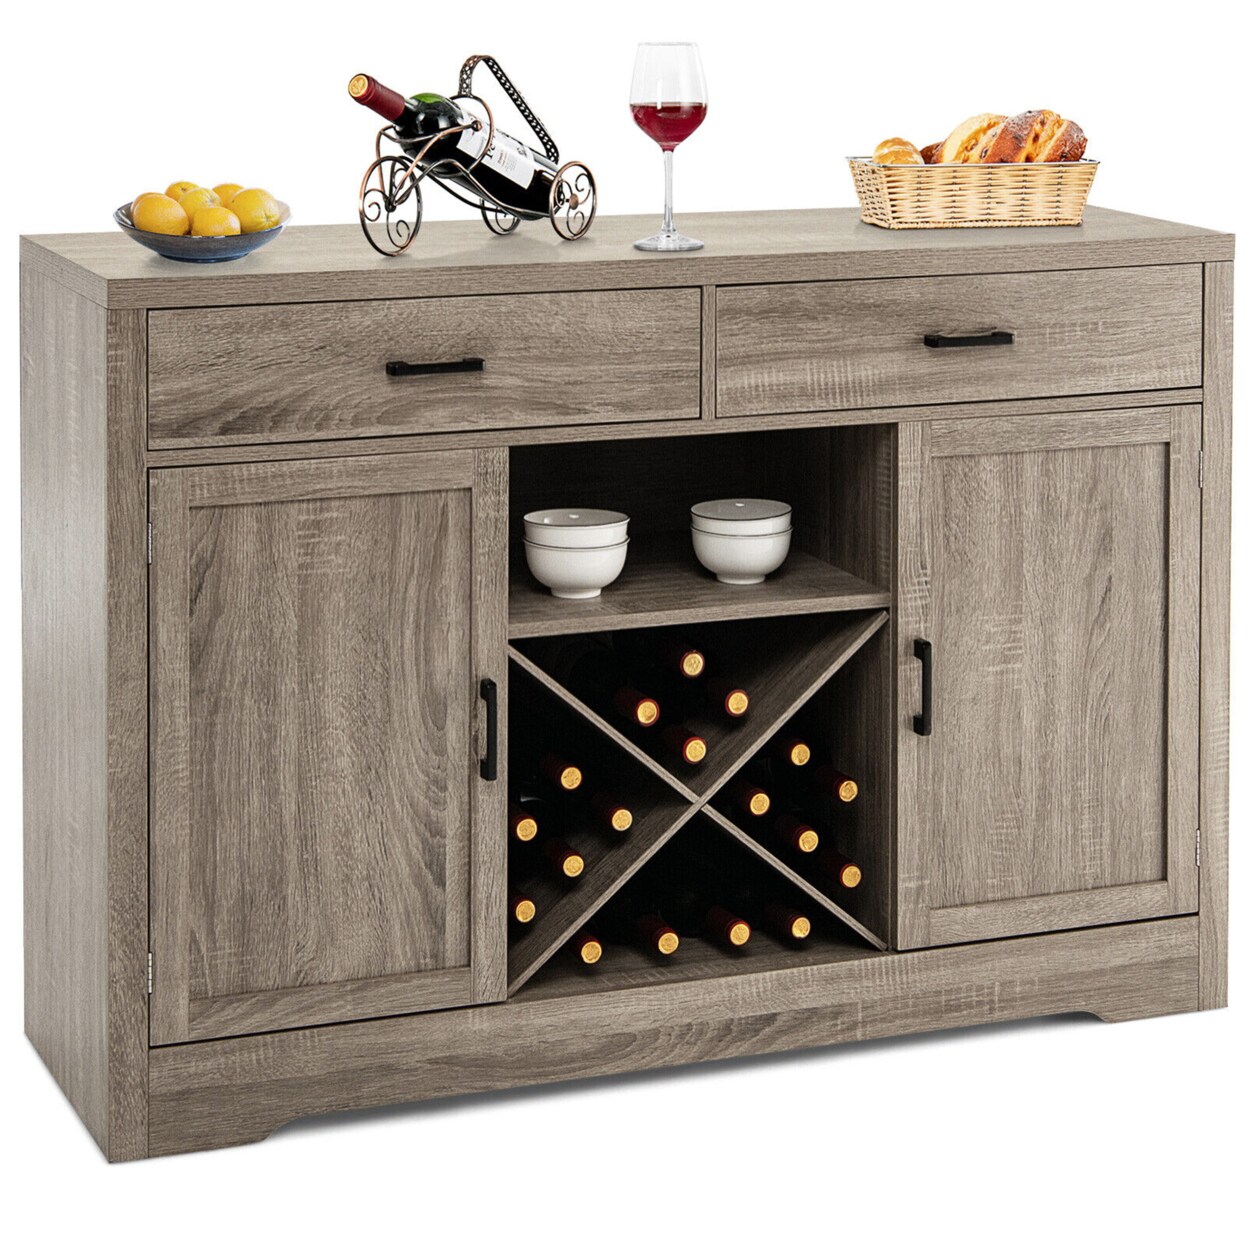 Gymax Kitchen Storage Buffet Cabinet Farmhouse Wooden Sideboard w/2 Drawer and Wine Rack